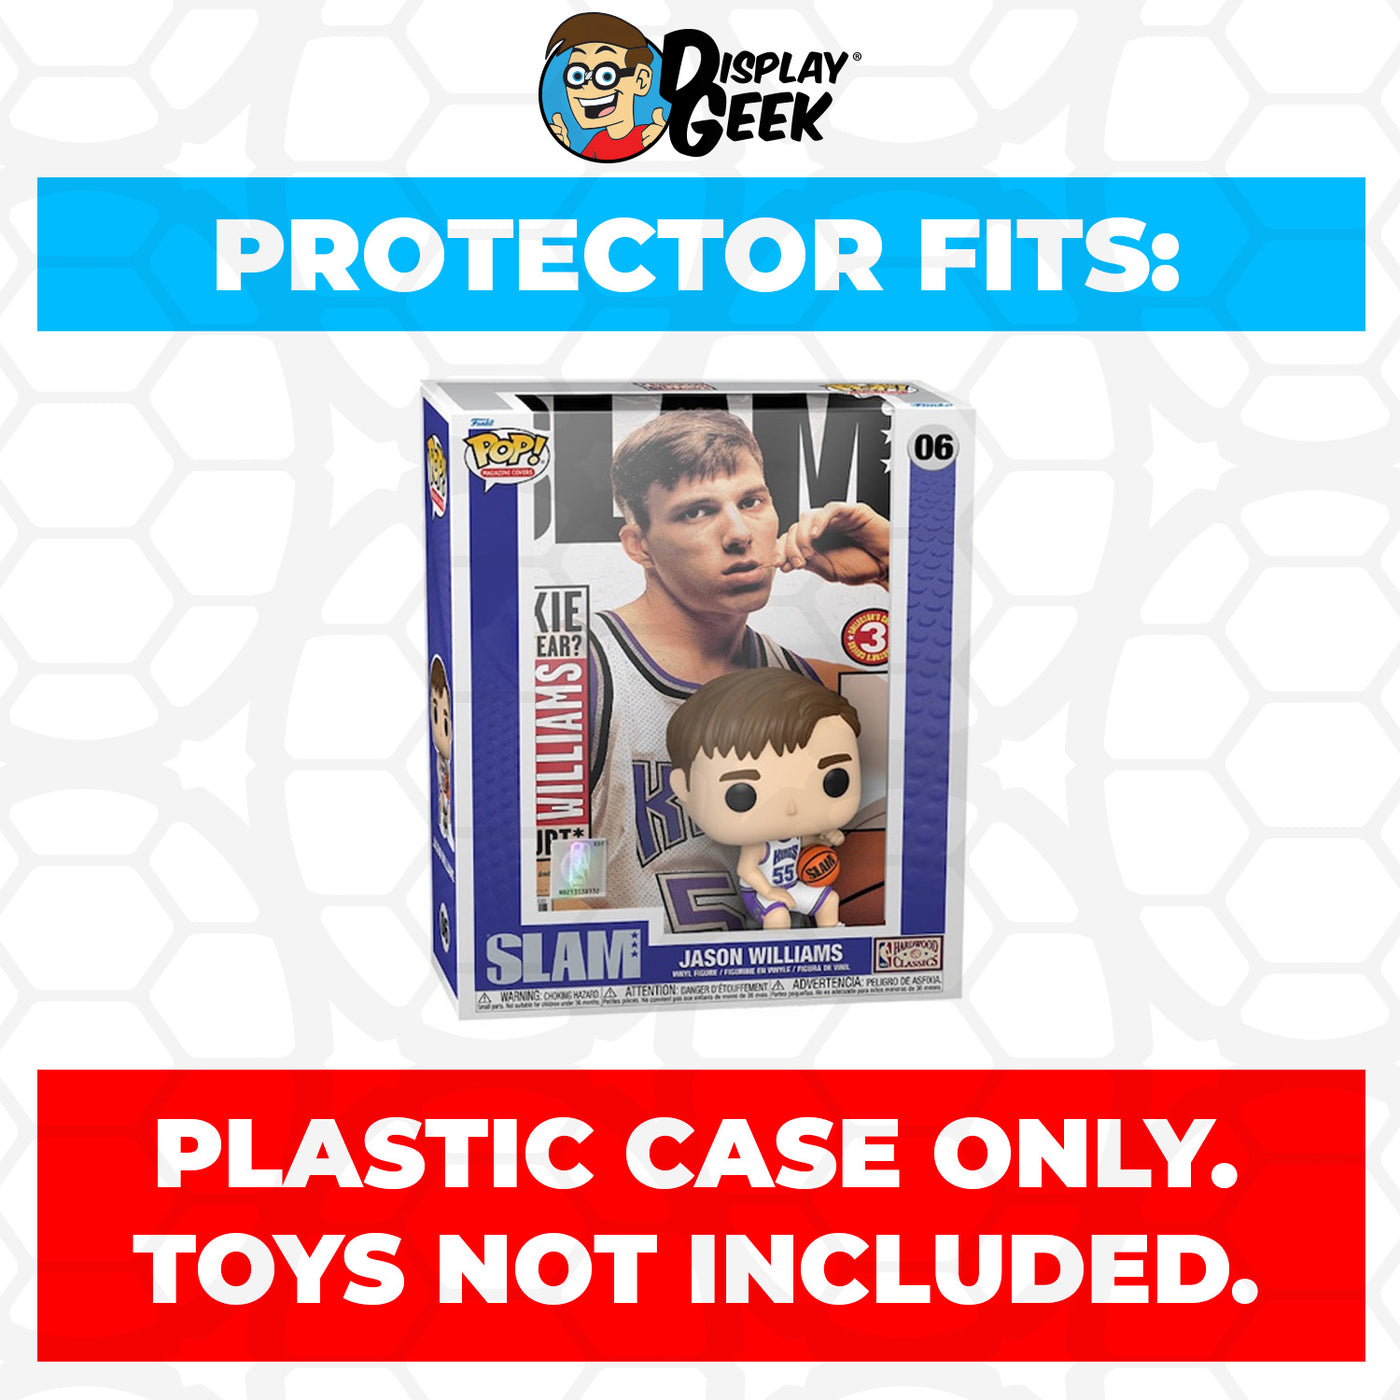 Pop Protector for Jason Williams #06 Funko Pop Magazine Covers on The Protector Guide App by Display Geek